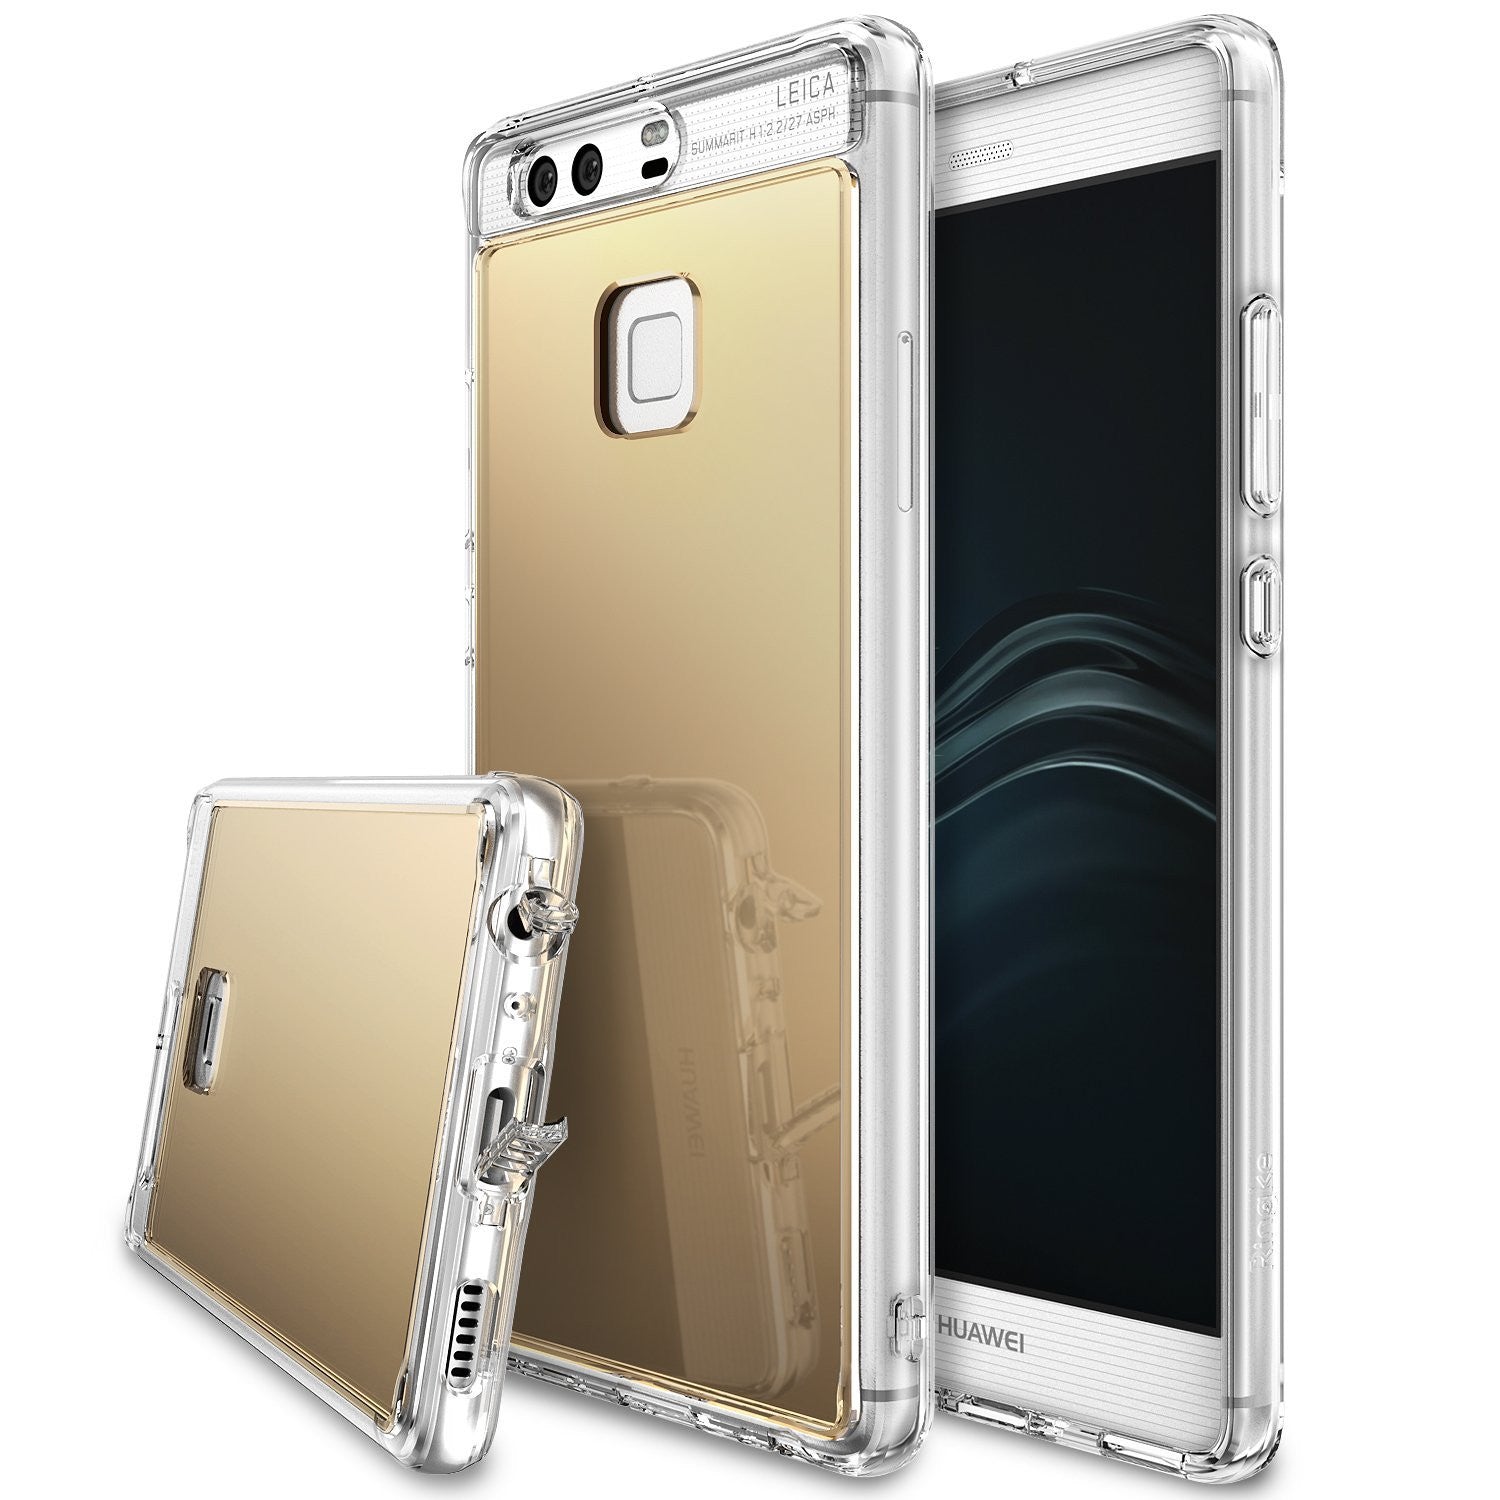 schroot Draaien cement Huawei P9 Case | Mirror – Ringke Official Store